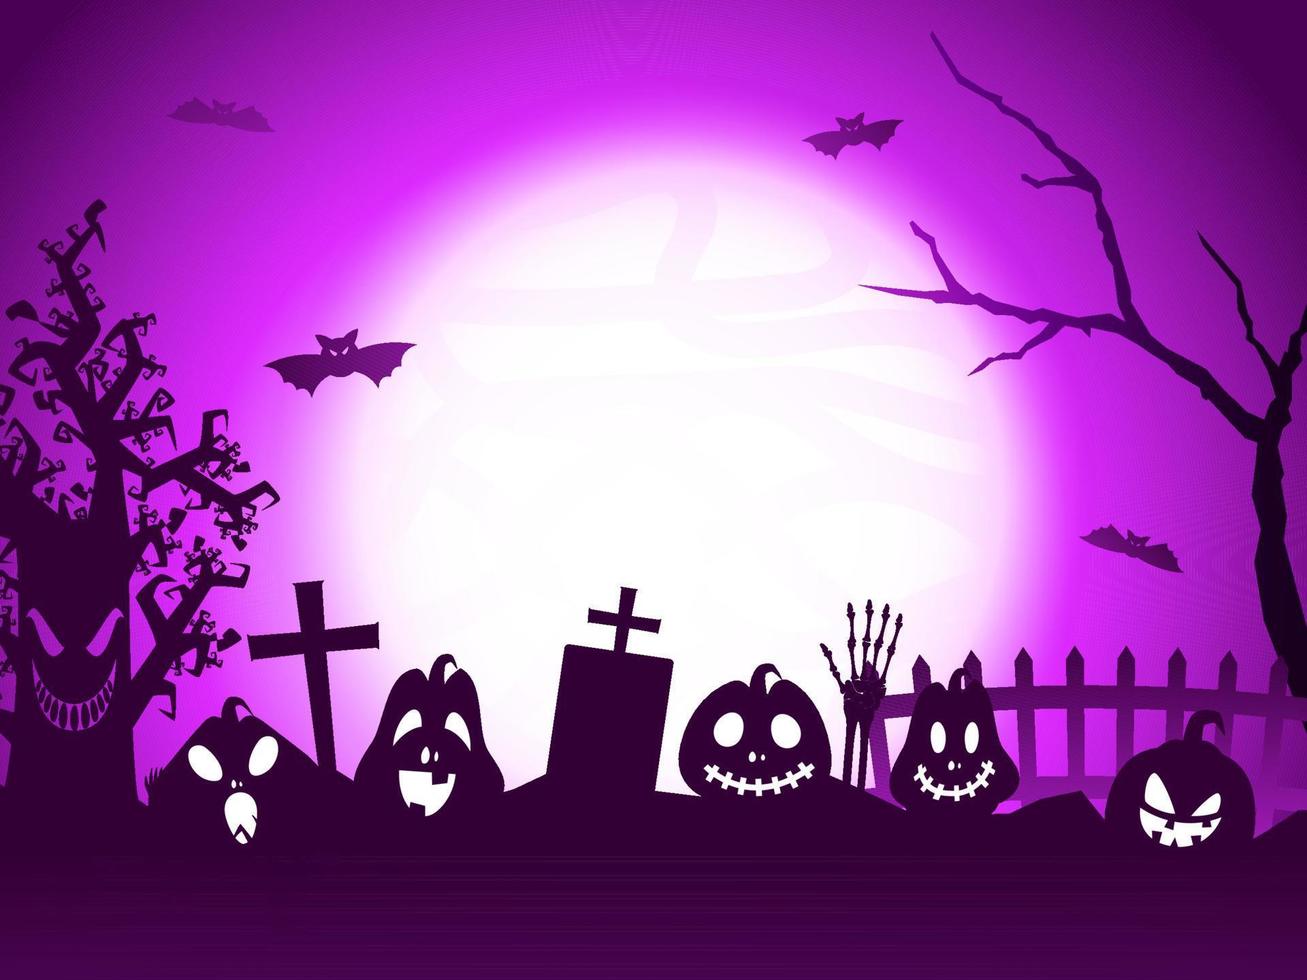 Full Moon Purple Graveyard Background with Jack-O-Lanterns, Flying Bats, Skeleton Hand and Scary Tree. vector